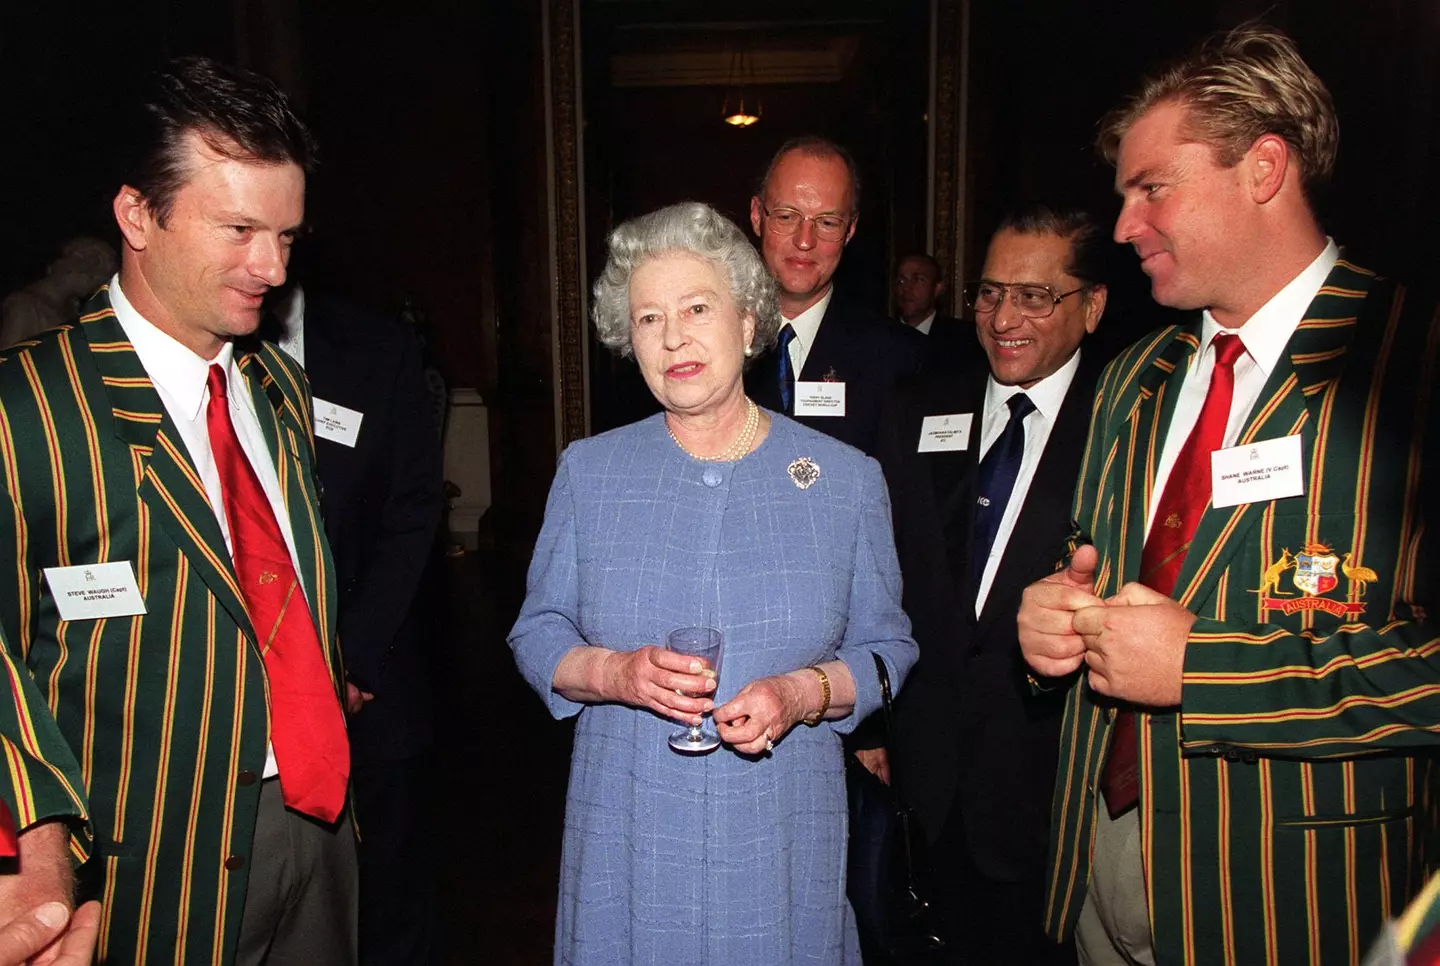 The Queen with Australian cricketers Steve Waugh and Shane Warne.